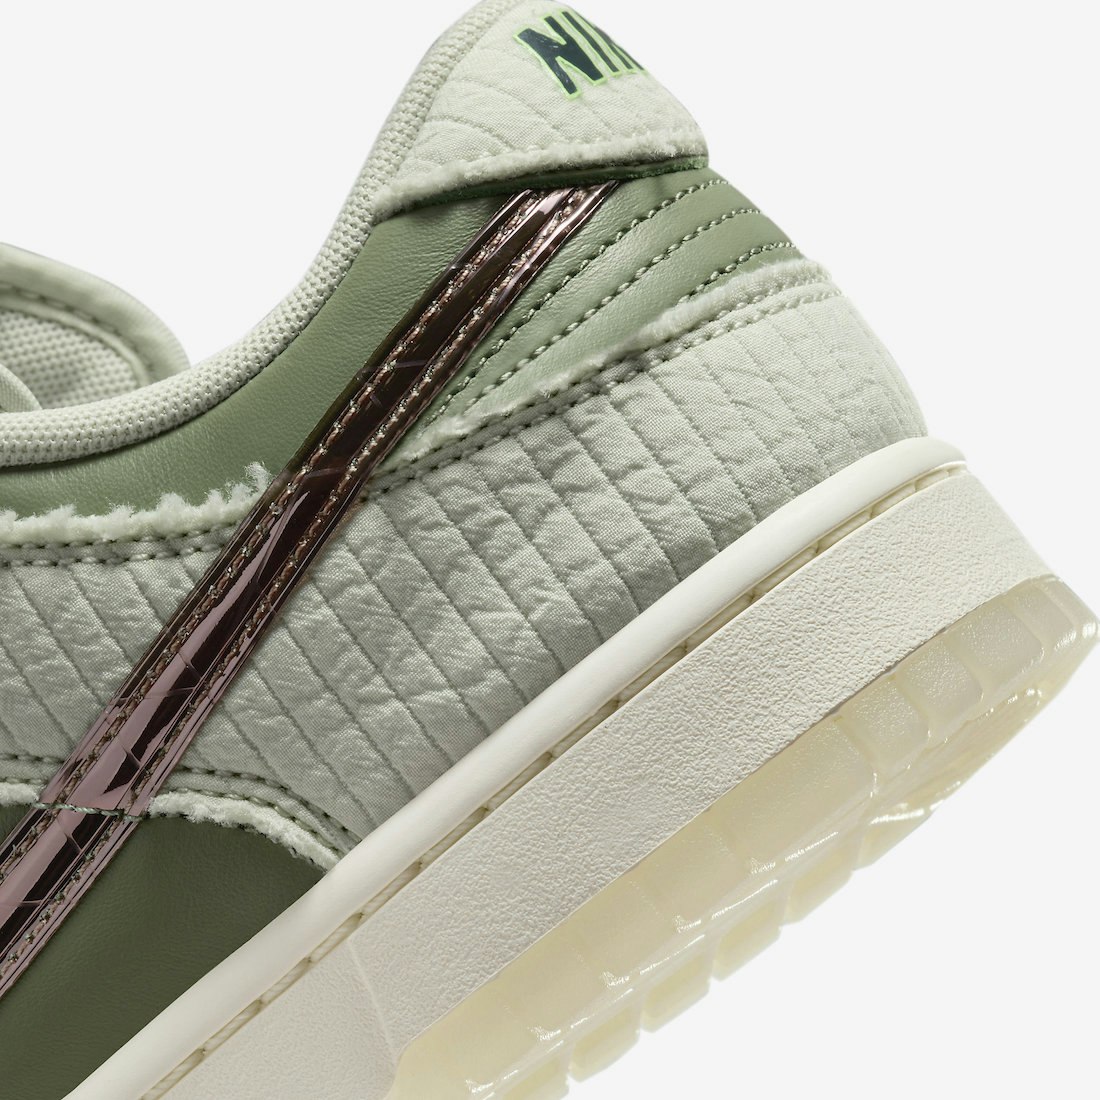 Kyler Murray x Nike Dunk Low "Be 1 of One"